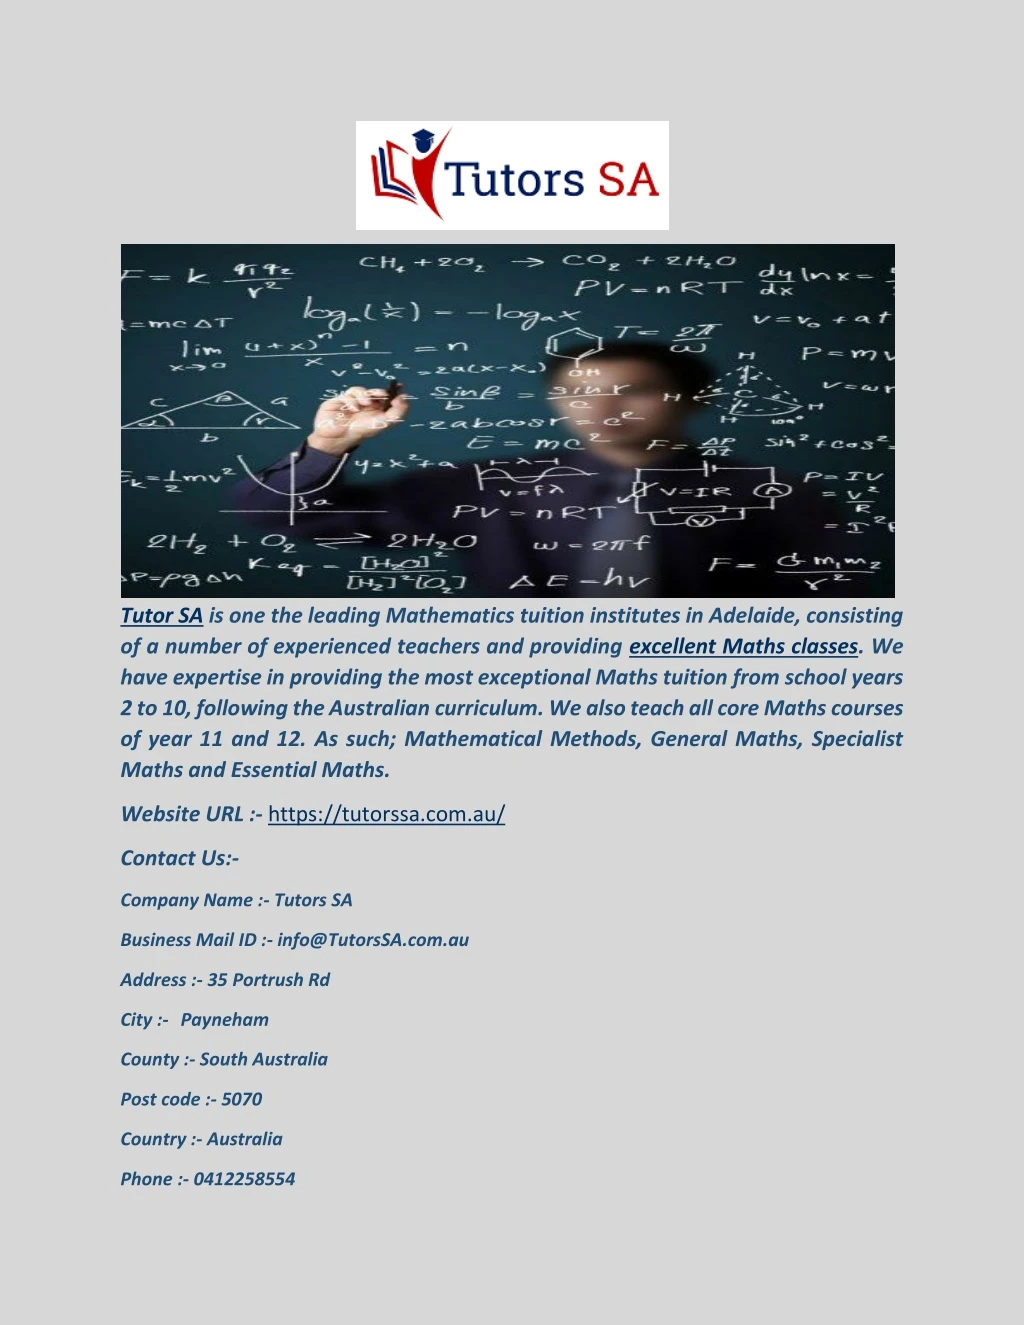 tutor sa is one the leading mathematics tuition